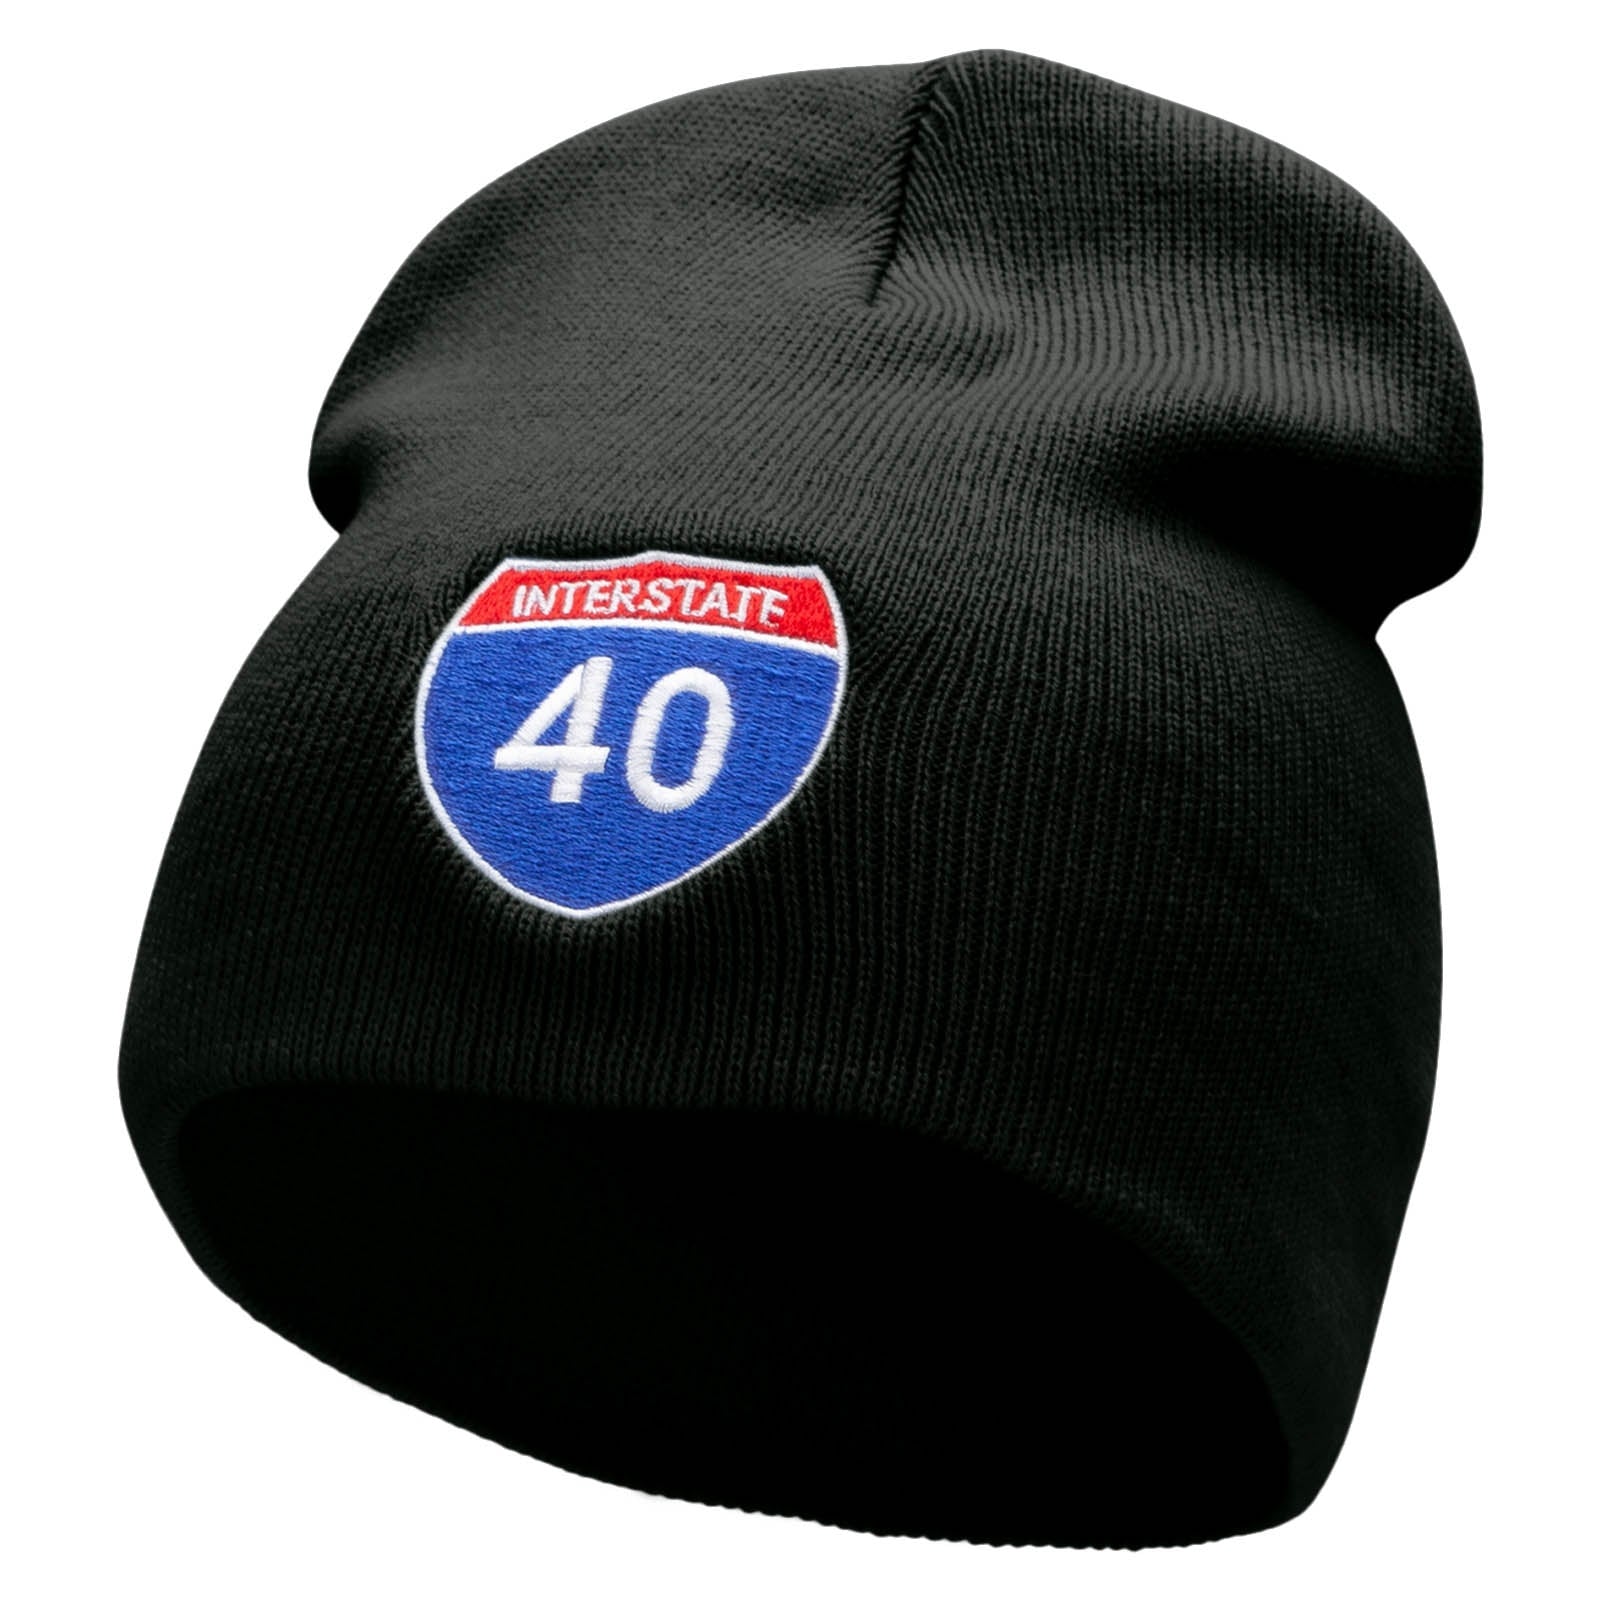 Interstate Highway 40 Sign Embroidered 8 inch Acrylic Short Blank Beanie - Black OSFM